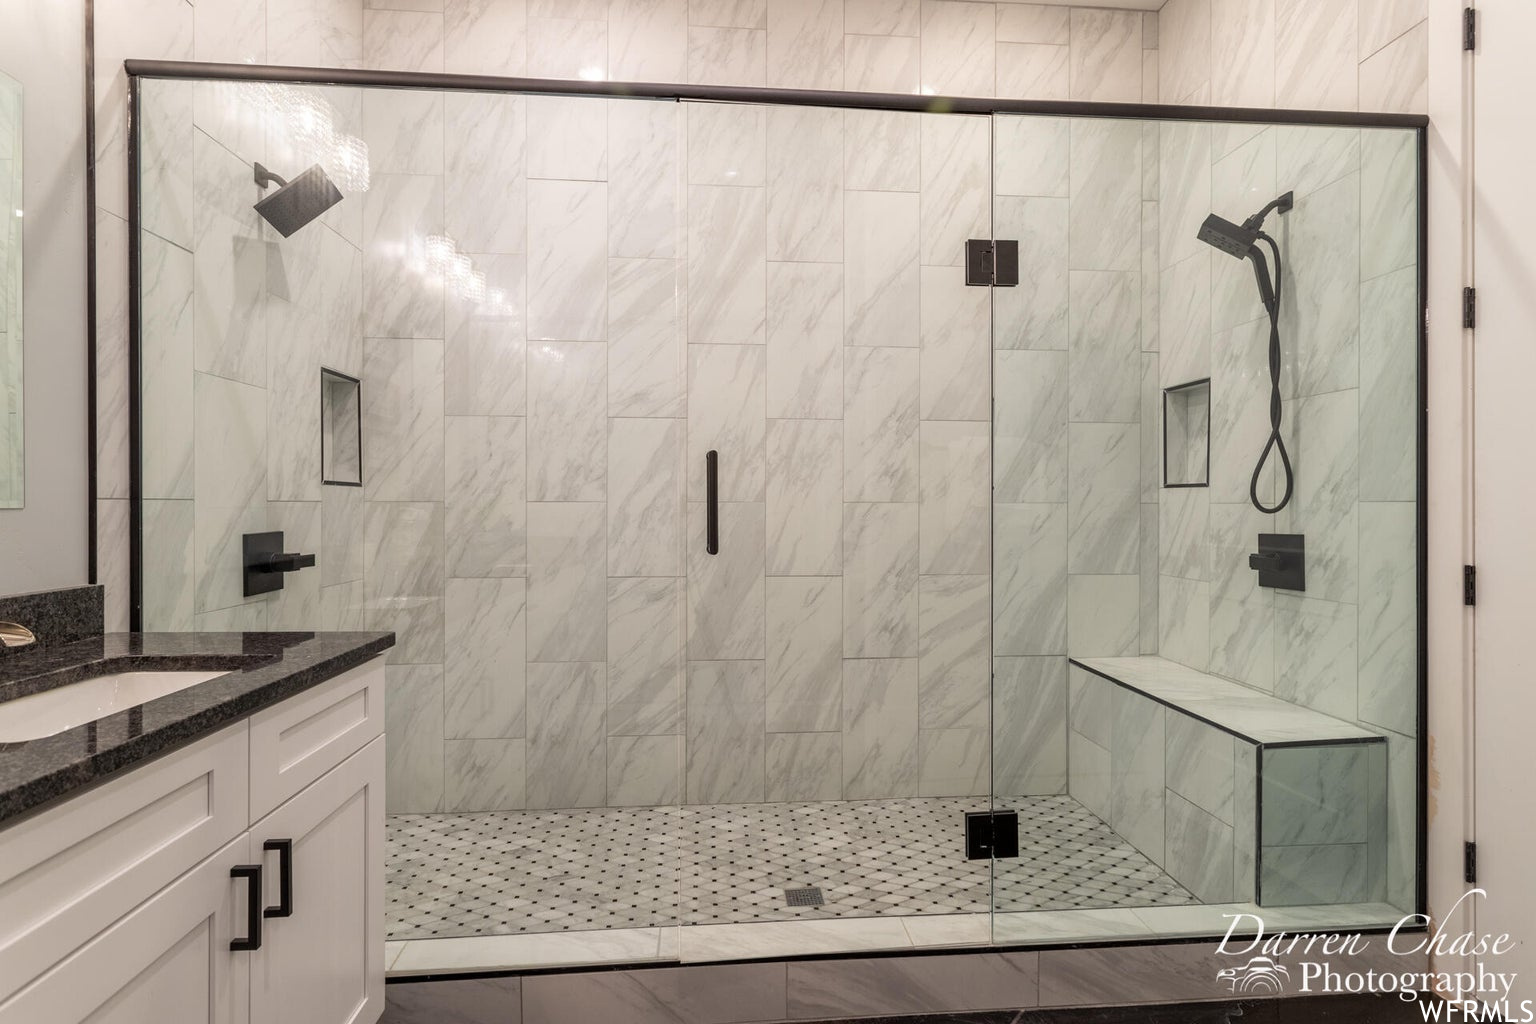 Bathroom featuring tile floors, enclosed shower, and vanity